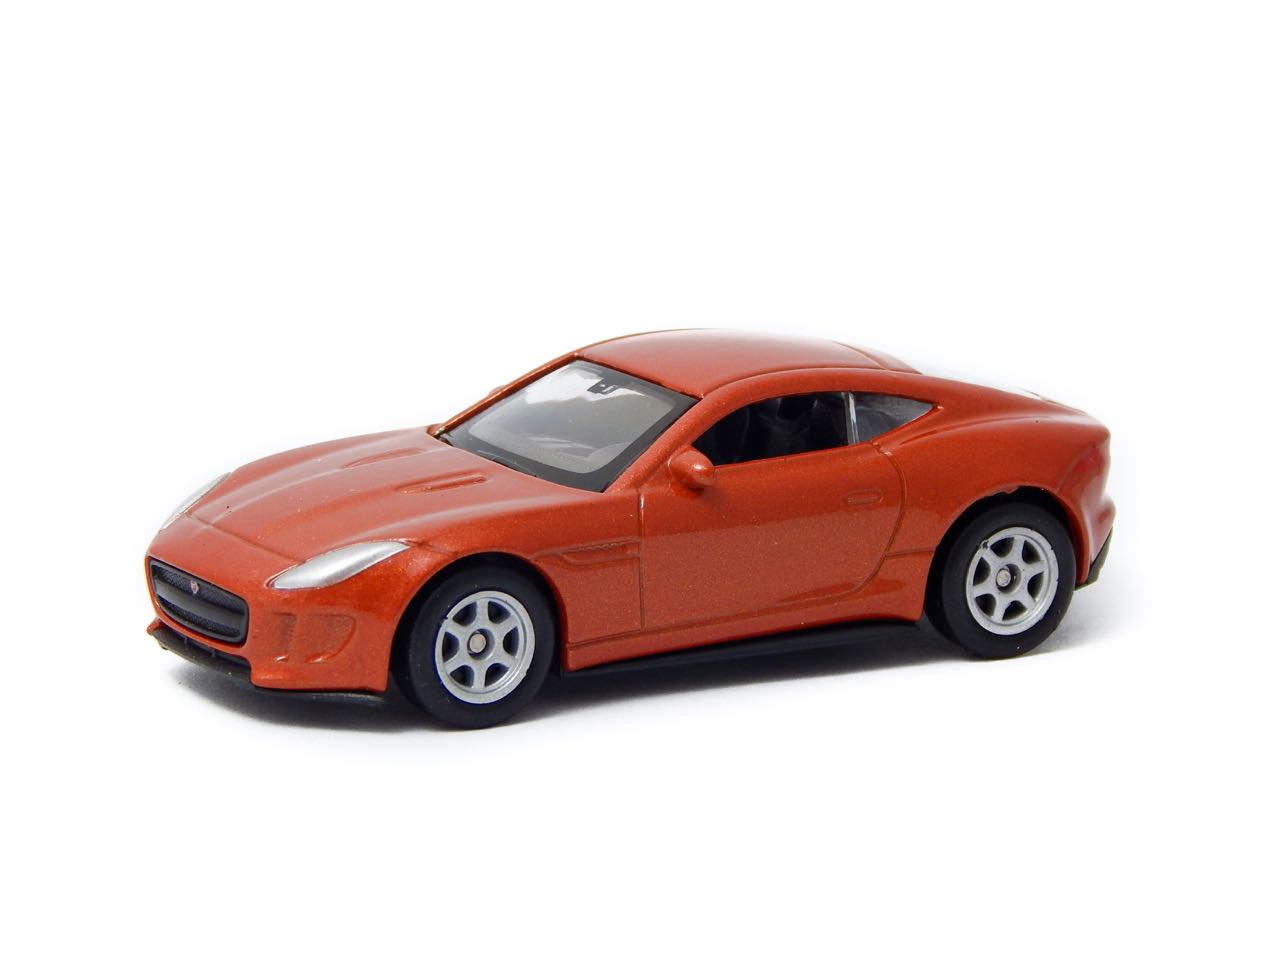 Welly scale 1:34-39 Jaguar F-Type Coupe white model toy car gift 